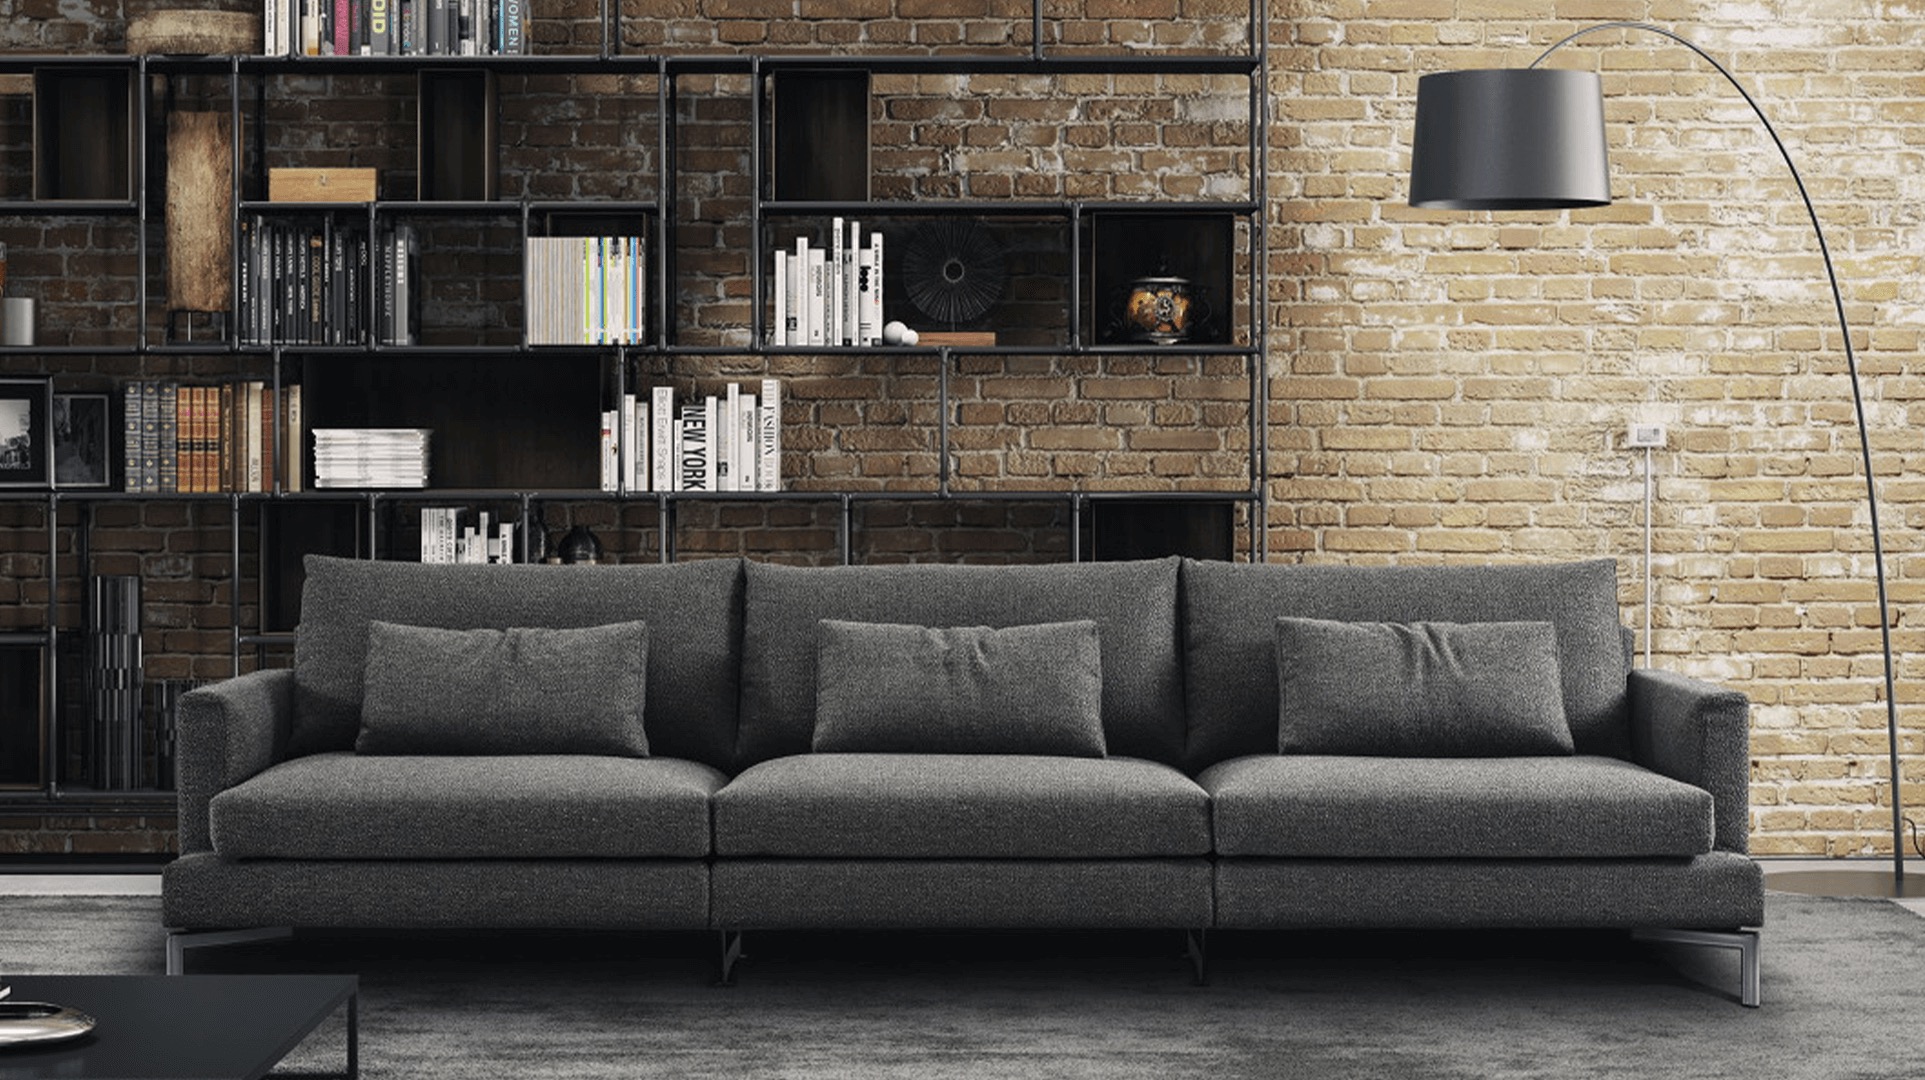 Blog IDW - The ideal sofa for your winter days